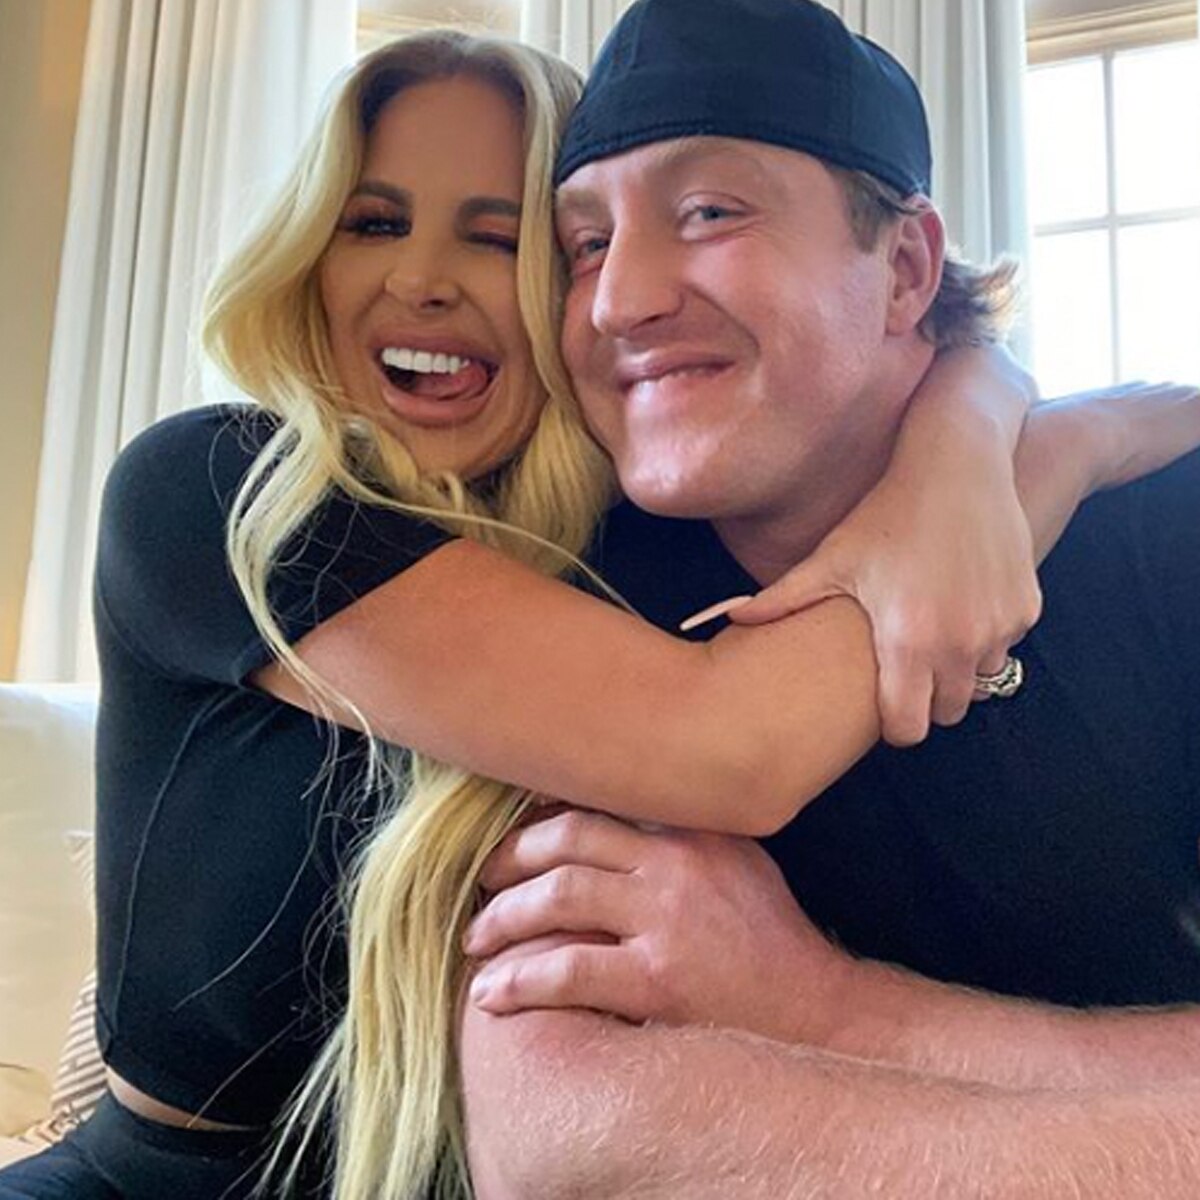 Kim Zolciak Gets Real About Her Sex Life With Kroy Biermann